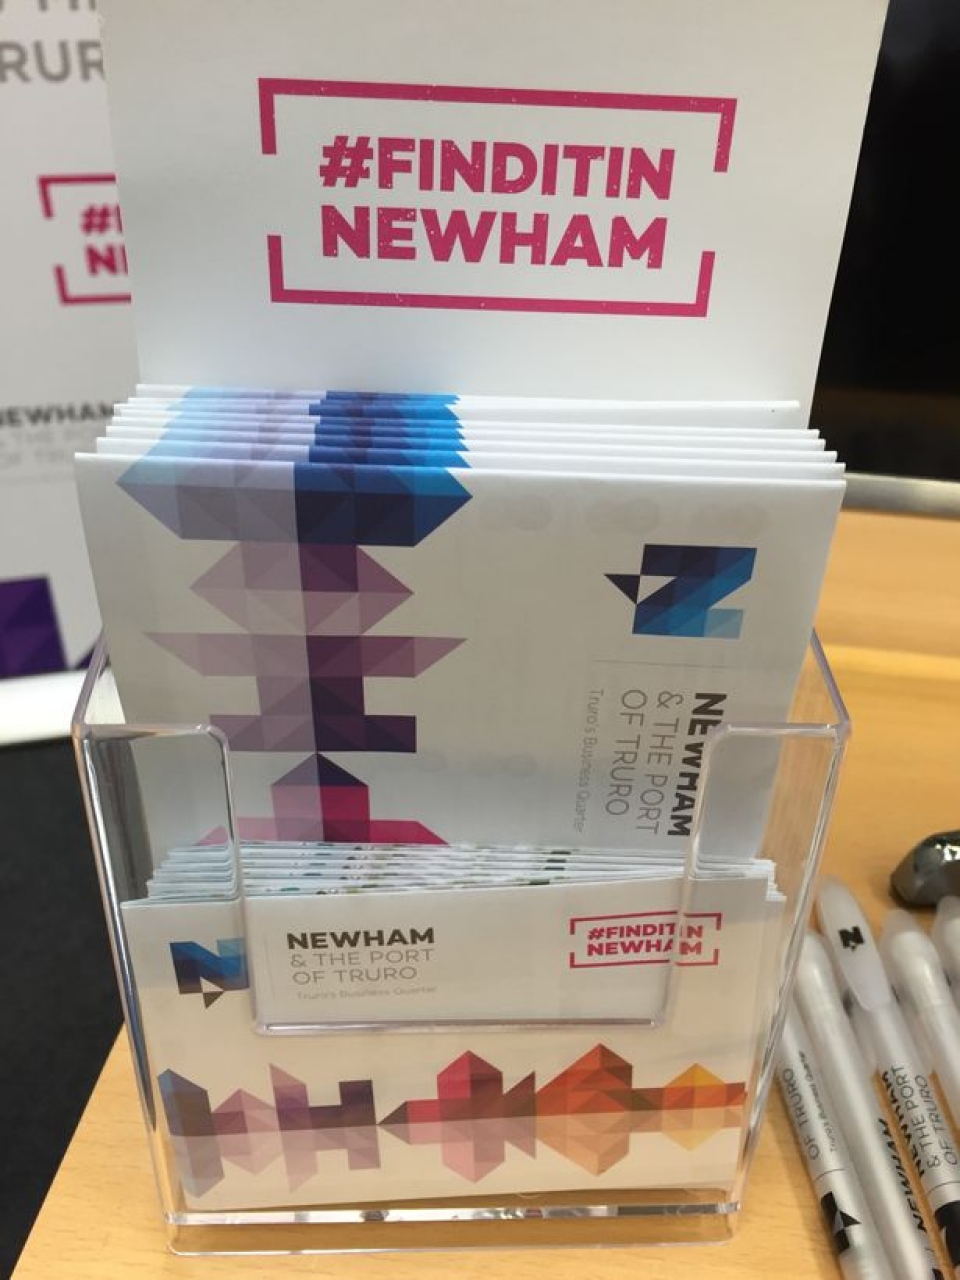 Colourful new initiative puts more than 100 business on the map at Newham